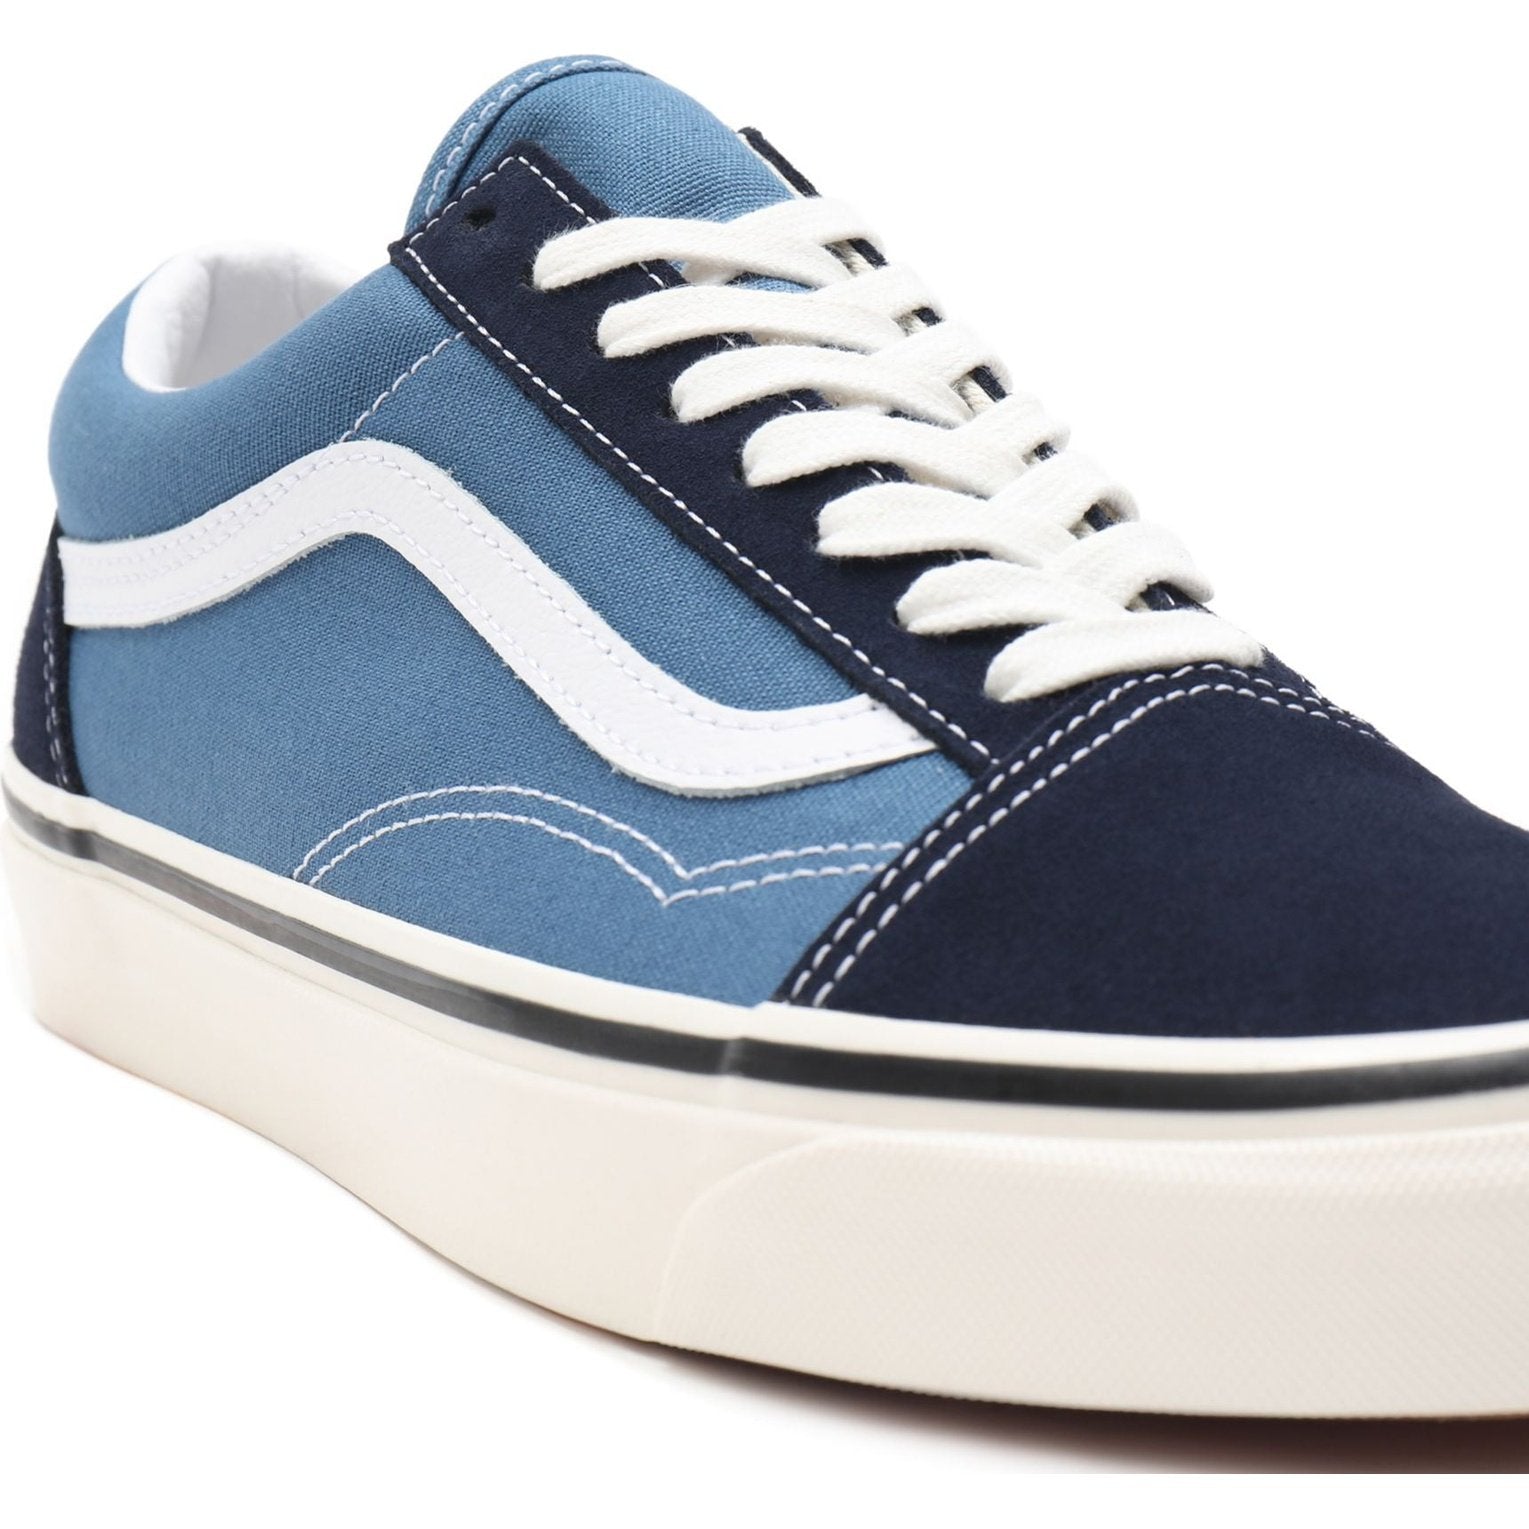 Anaheim Factory Old Skool 36 DX Shoes - Sporty Pro